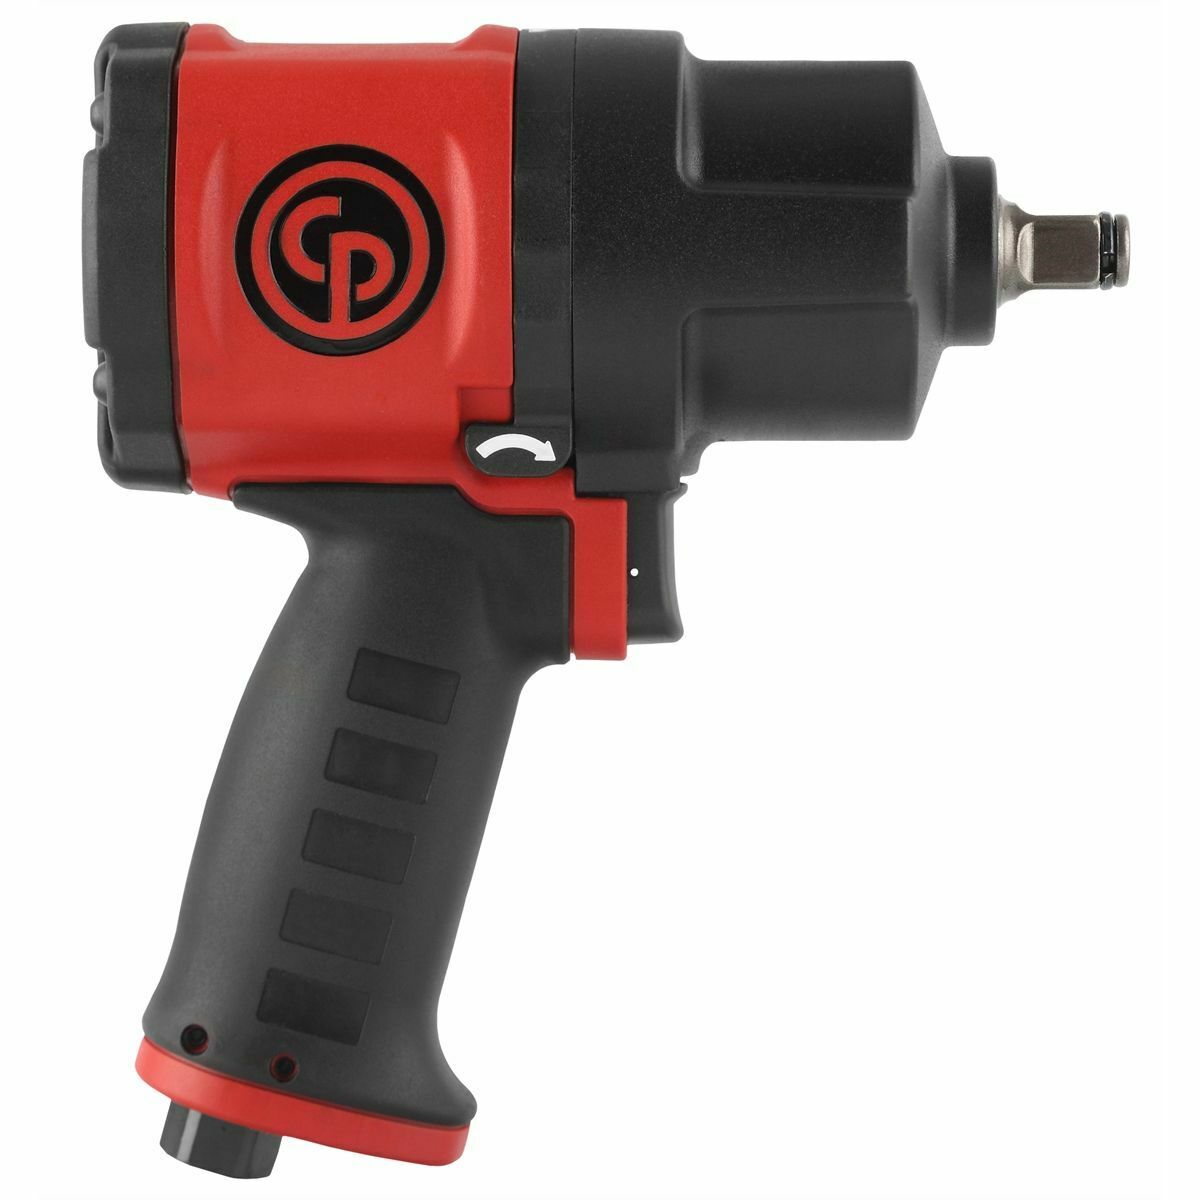 Chicago-pneumatic 7748 Cp7748 1/2" Air Impact Wrench